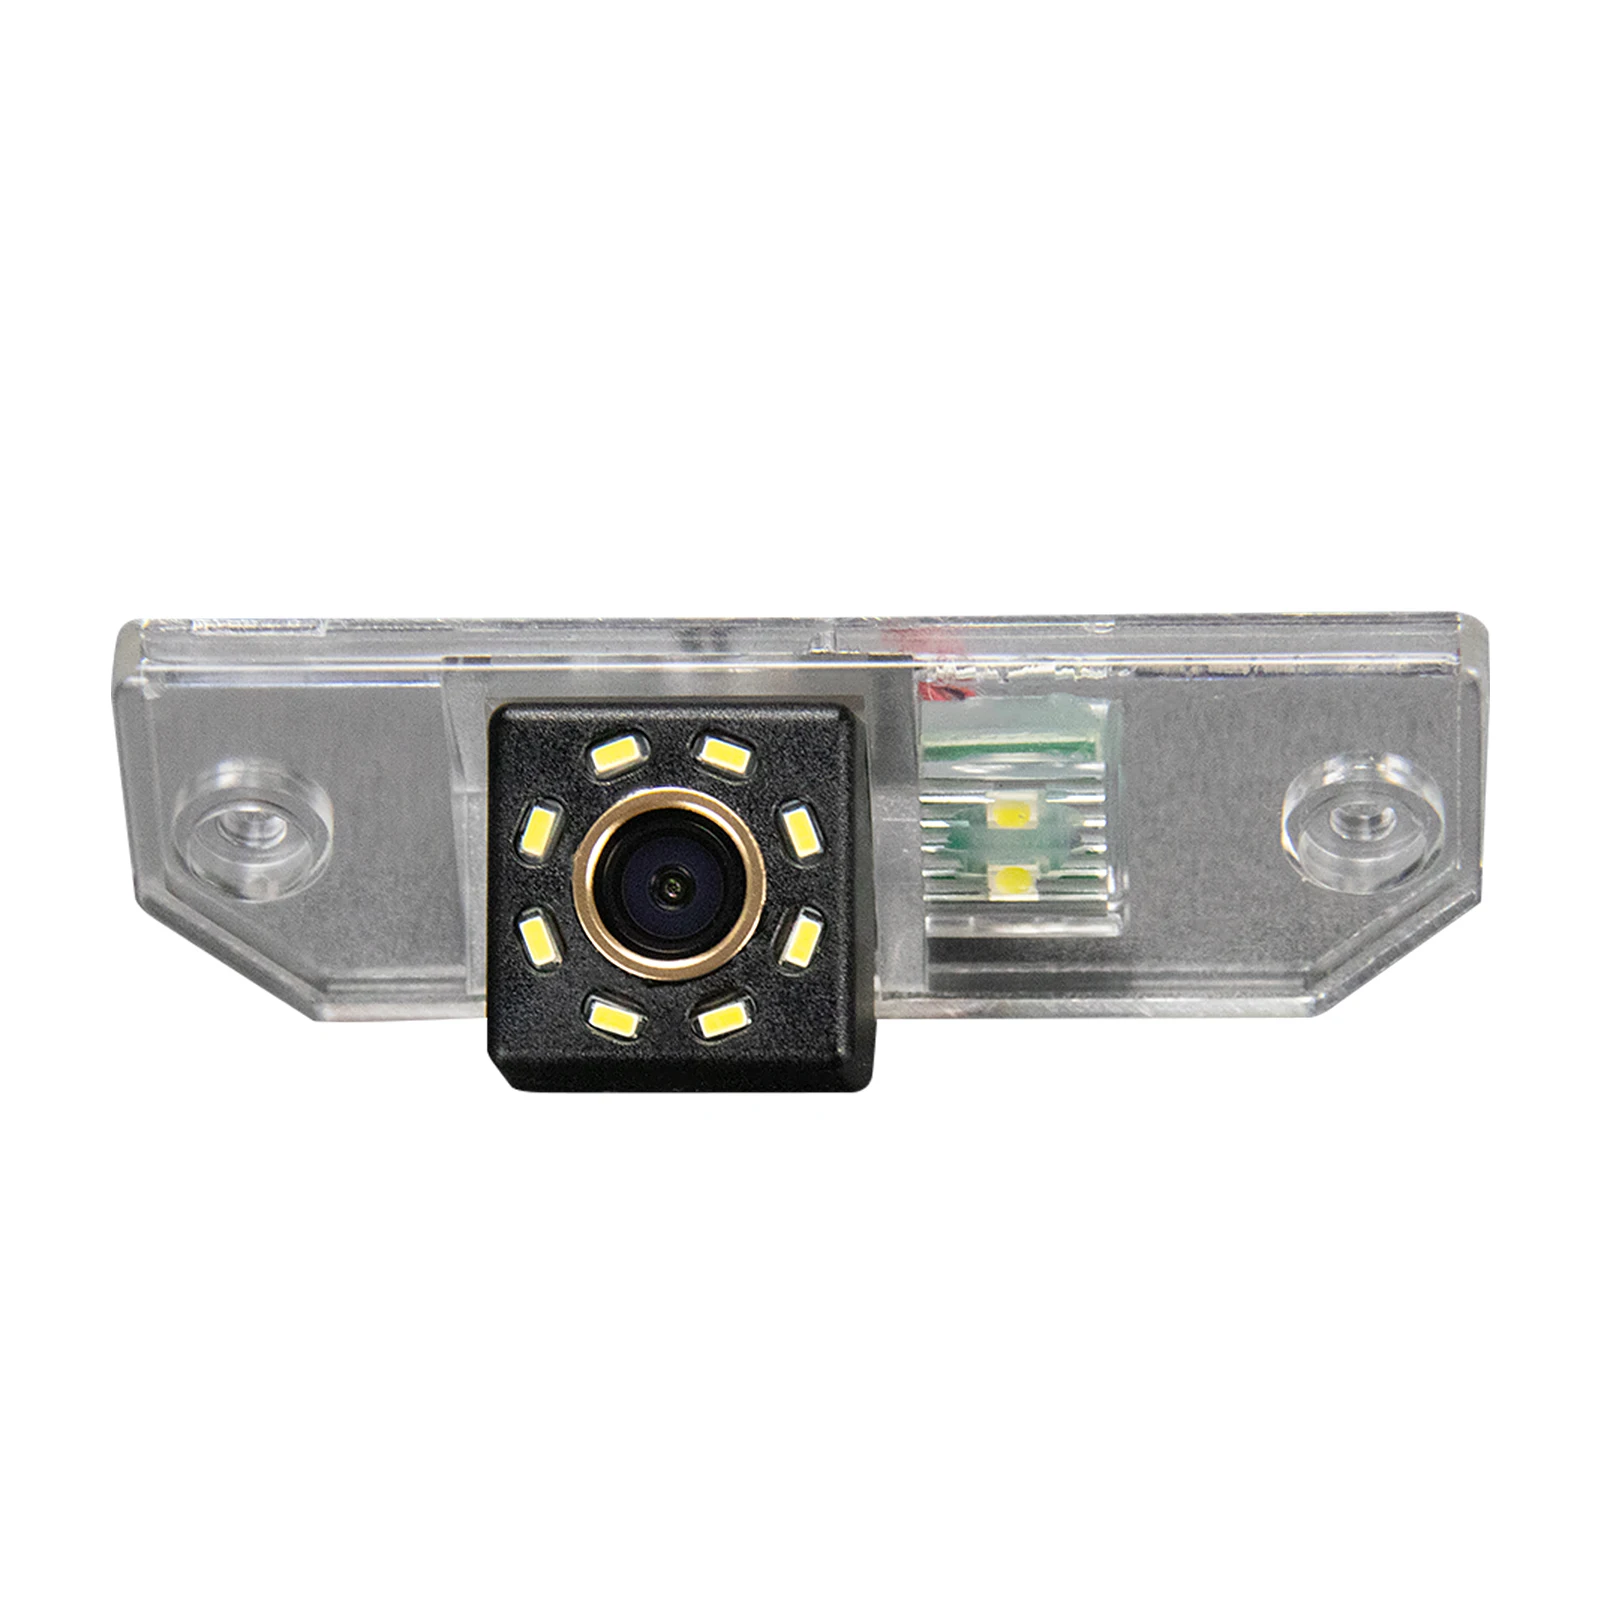 

HD Rear View Camera for FORD Mondeo/ Focus / C-Max from 2010 to 2012, Reversing Backup 8LED Waterproof camera Golden camera